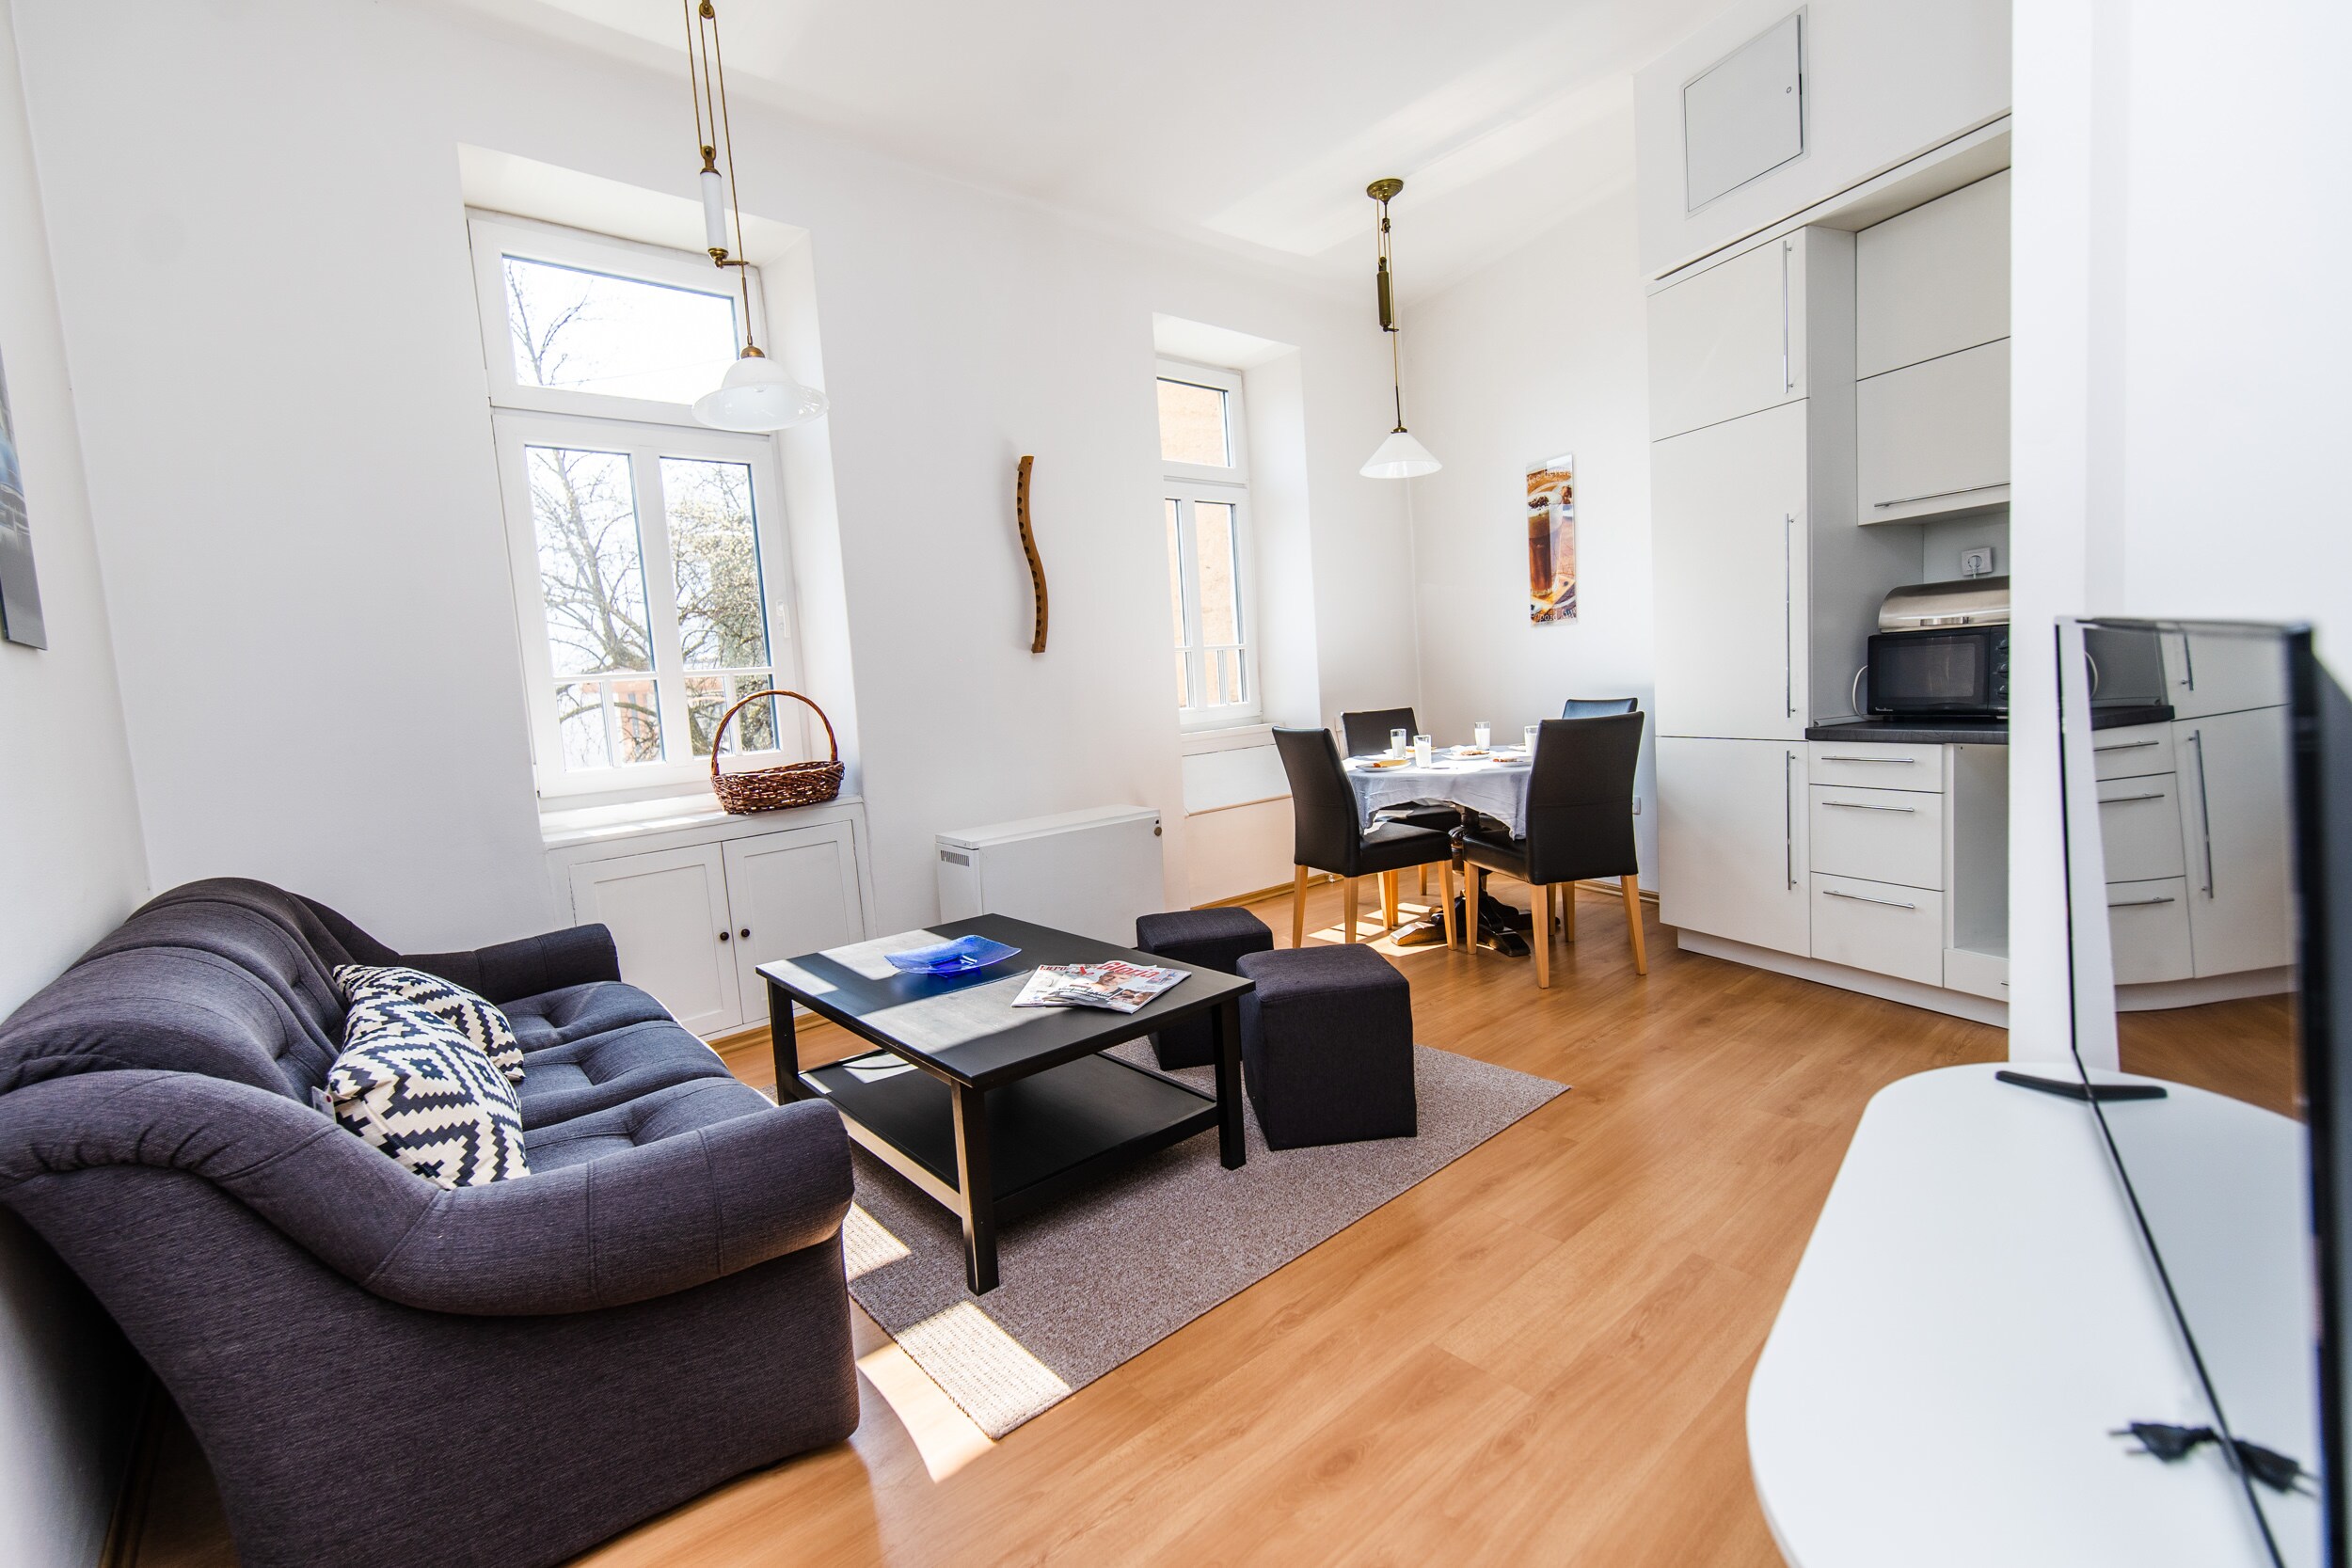 Our spacious and modern two-bedroom apartment just a few steps from the city center!